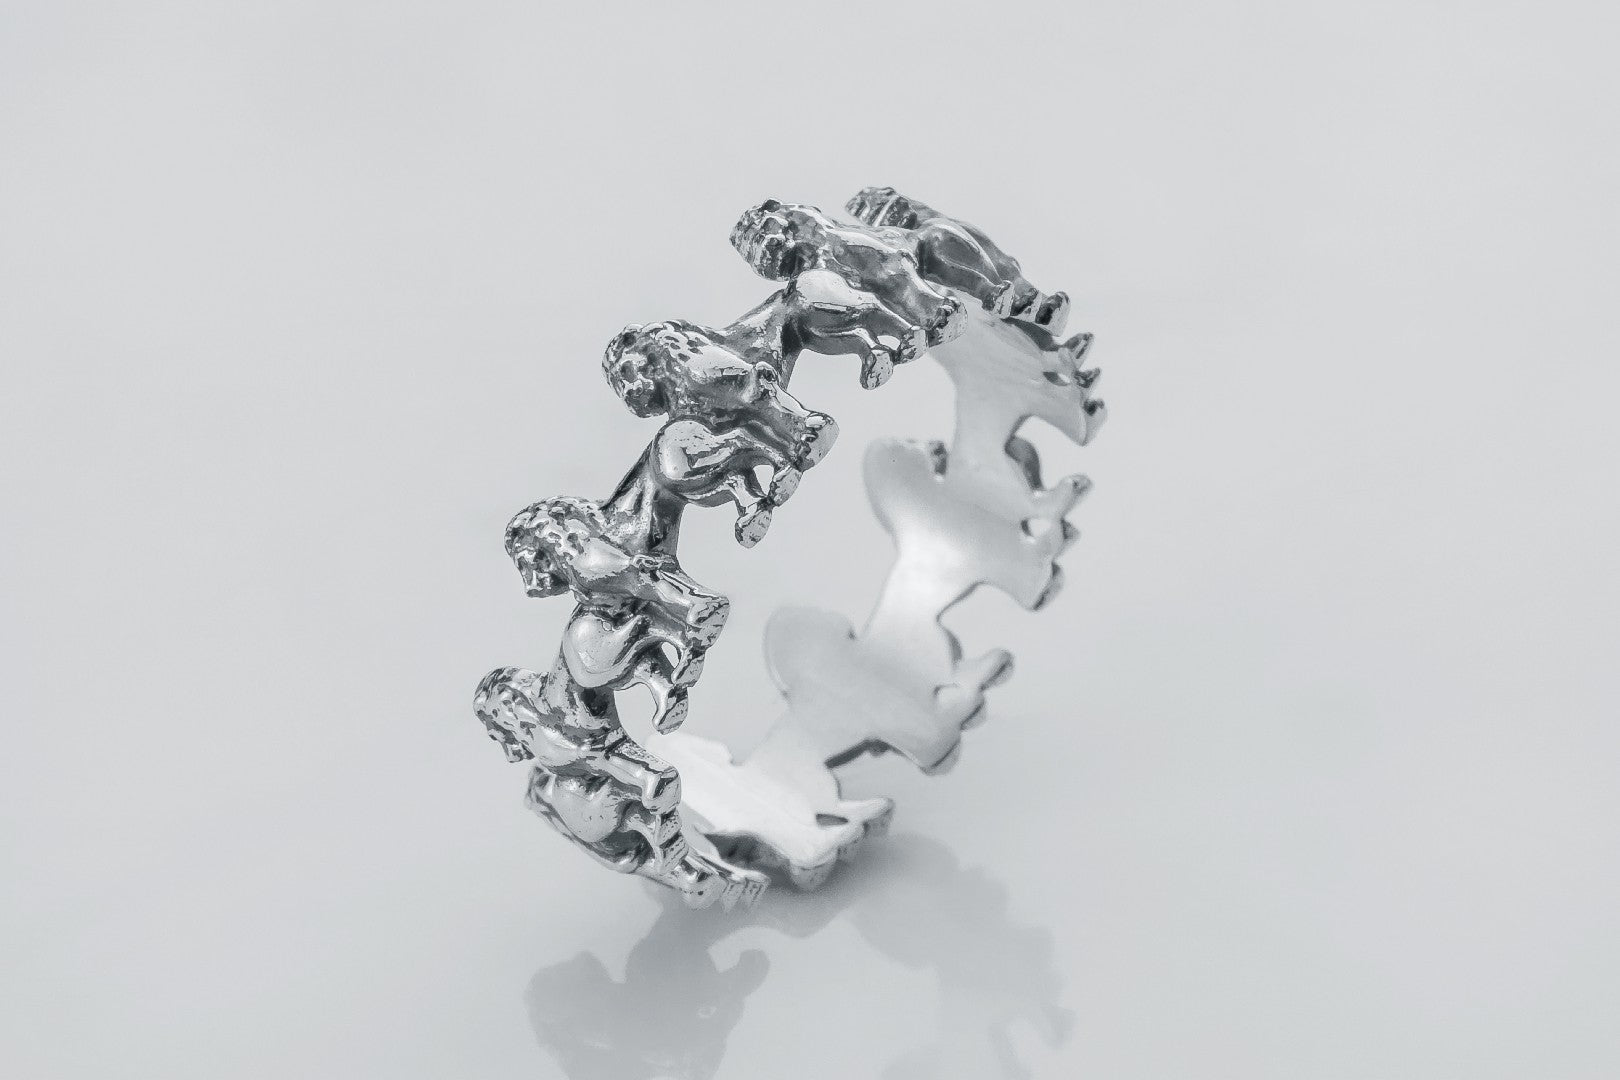 Lion Ring 925 Silver